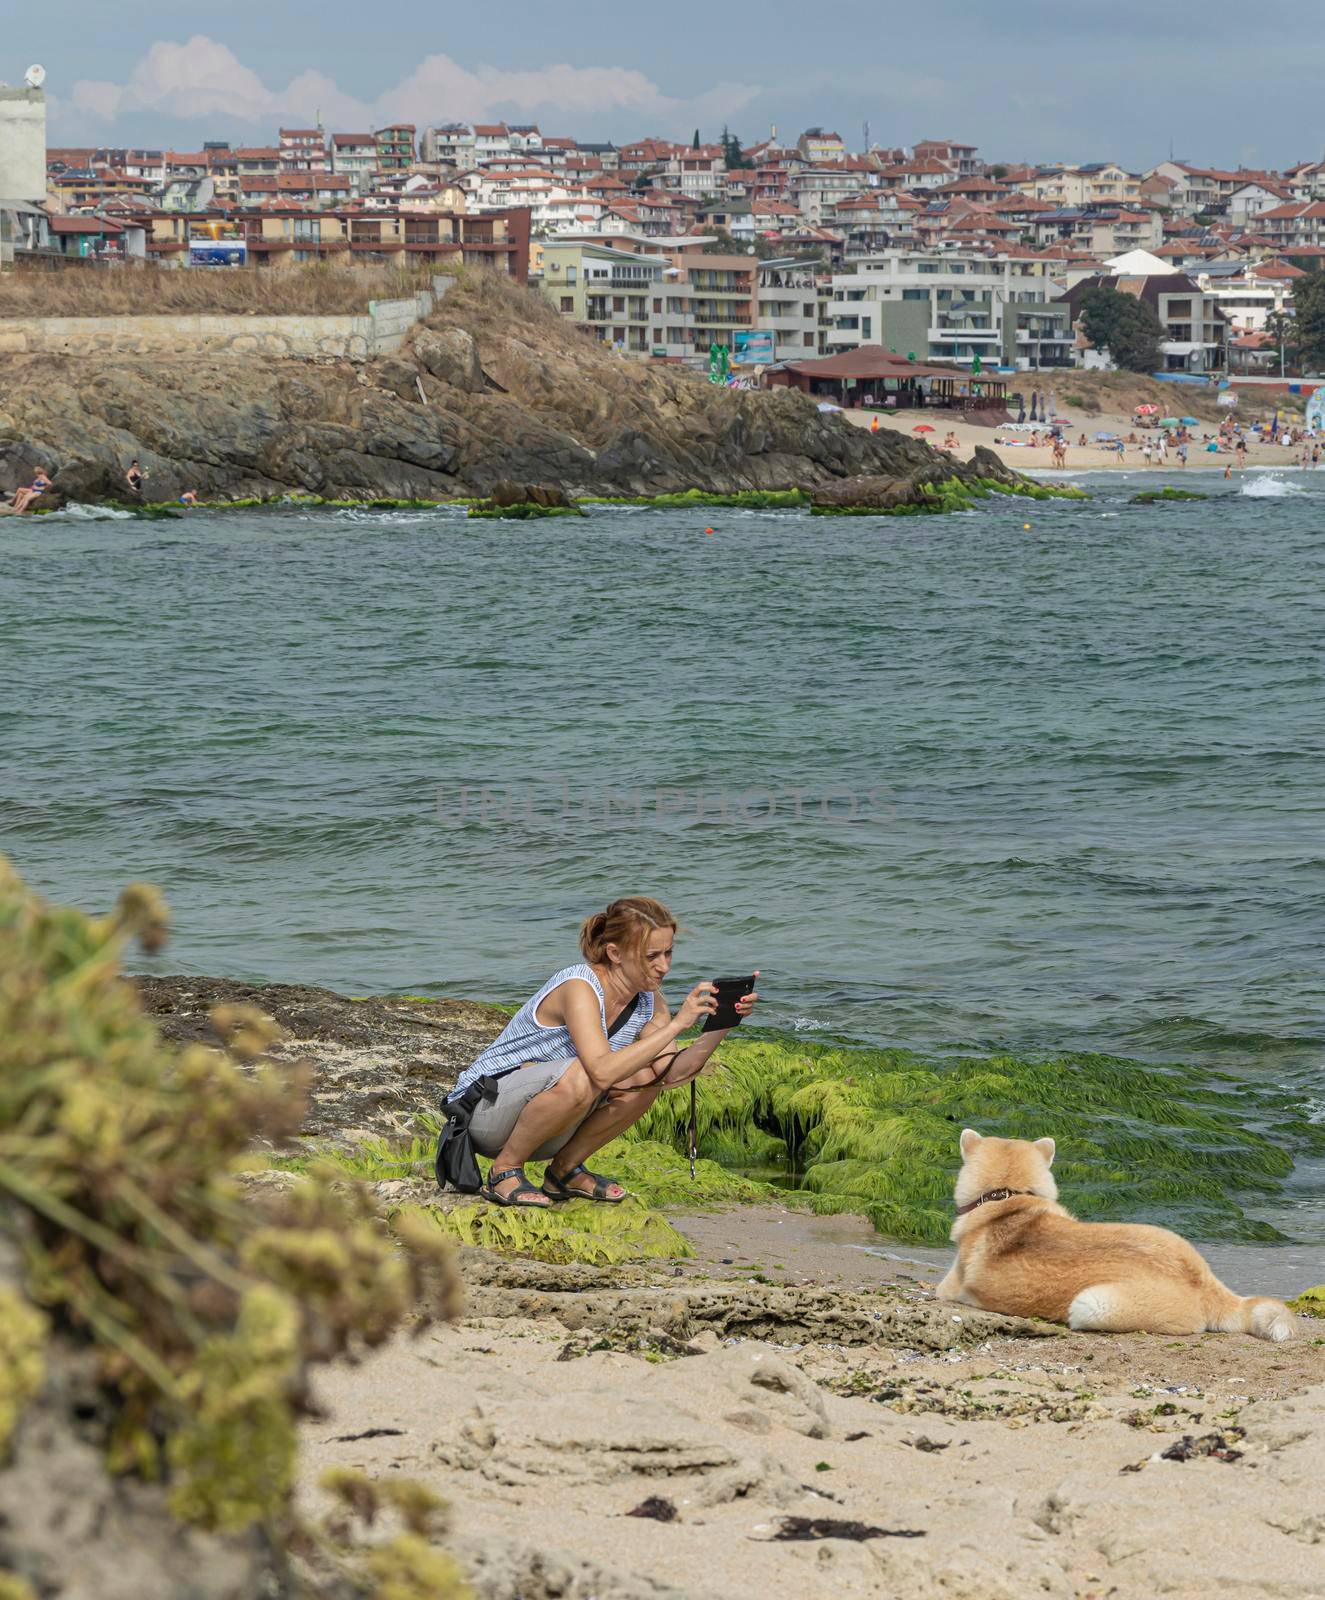 Bulgaria, SOZOPOL - 2018, 06 September: A woman photographs a dog on a rocky beach, blurred background by Grommik